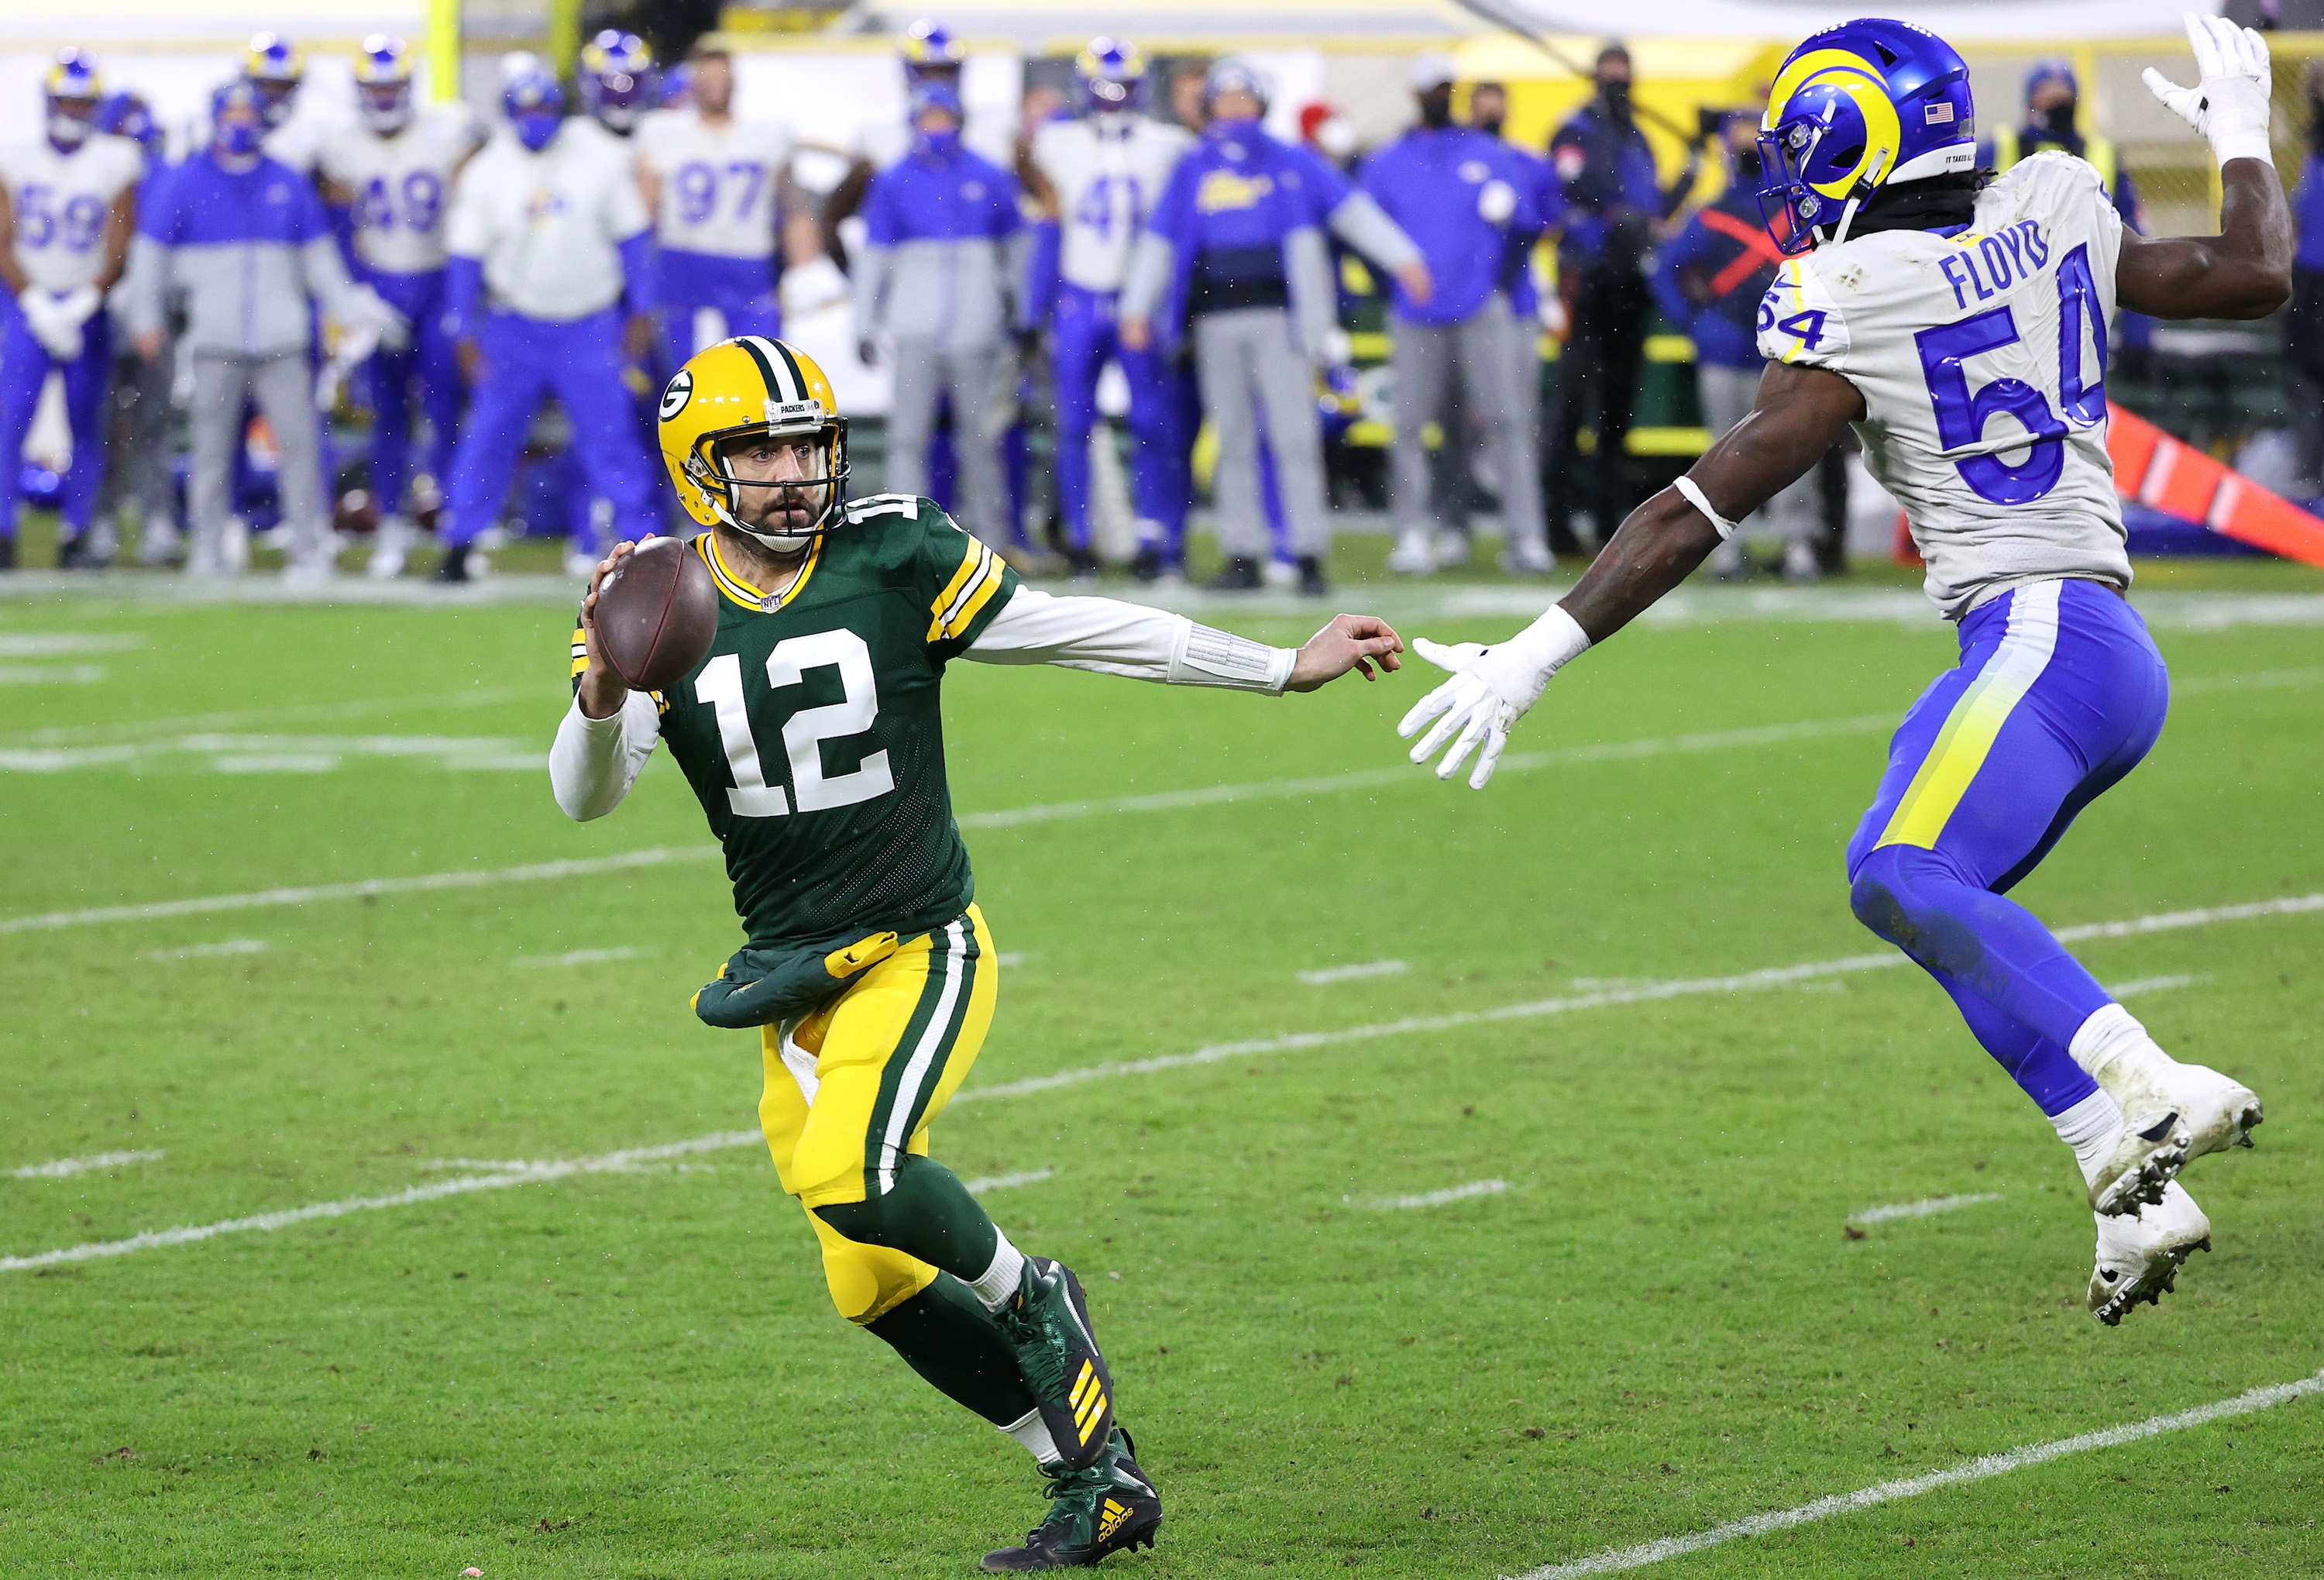 Aaron Rodgers #12 of the Green Bay Packers runs against Leonard Floyd #54 of the Los Angeles Rams for a 1-yard touchdown in the second quarter during the NFC Divisional Playoff game at Lambeau Field on January 16, 2021 in Green Bay, Wisconsin.